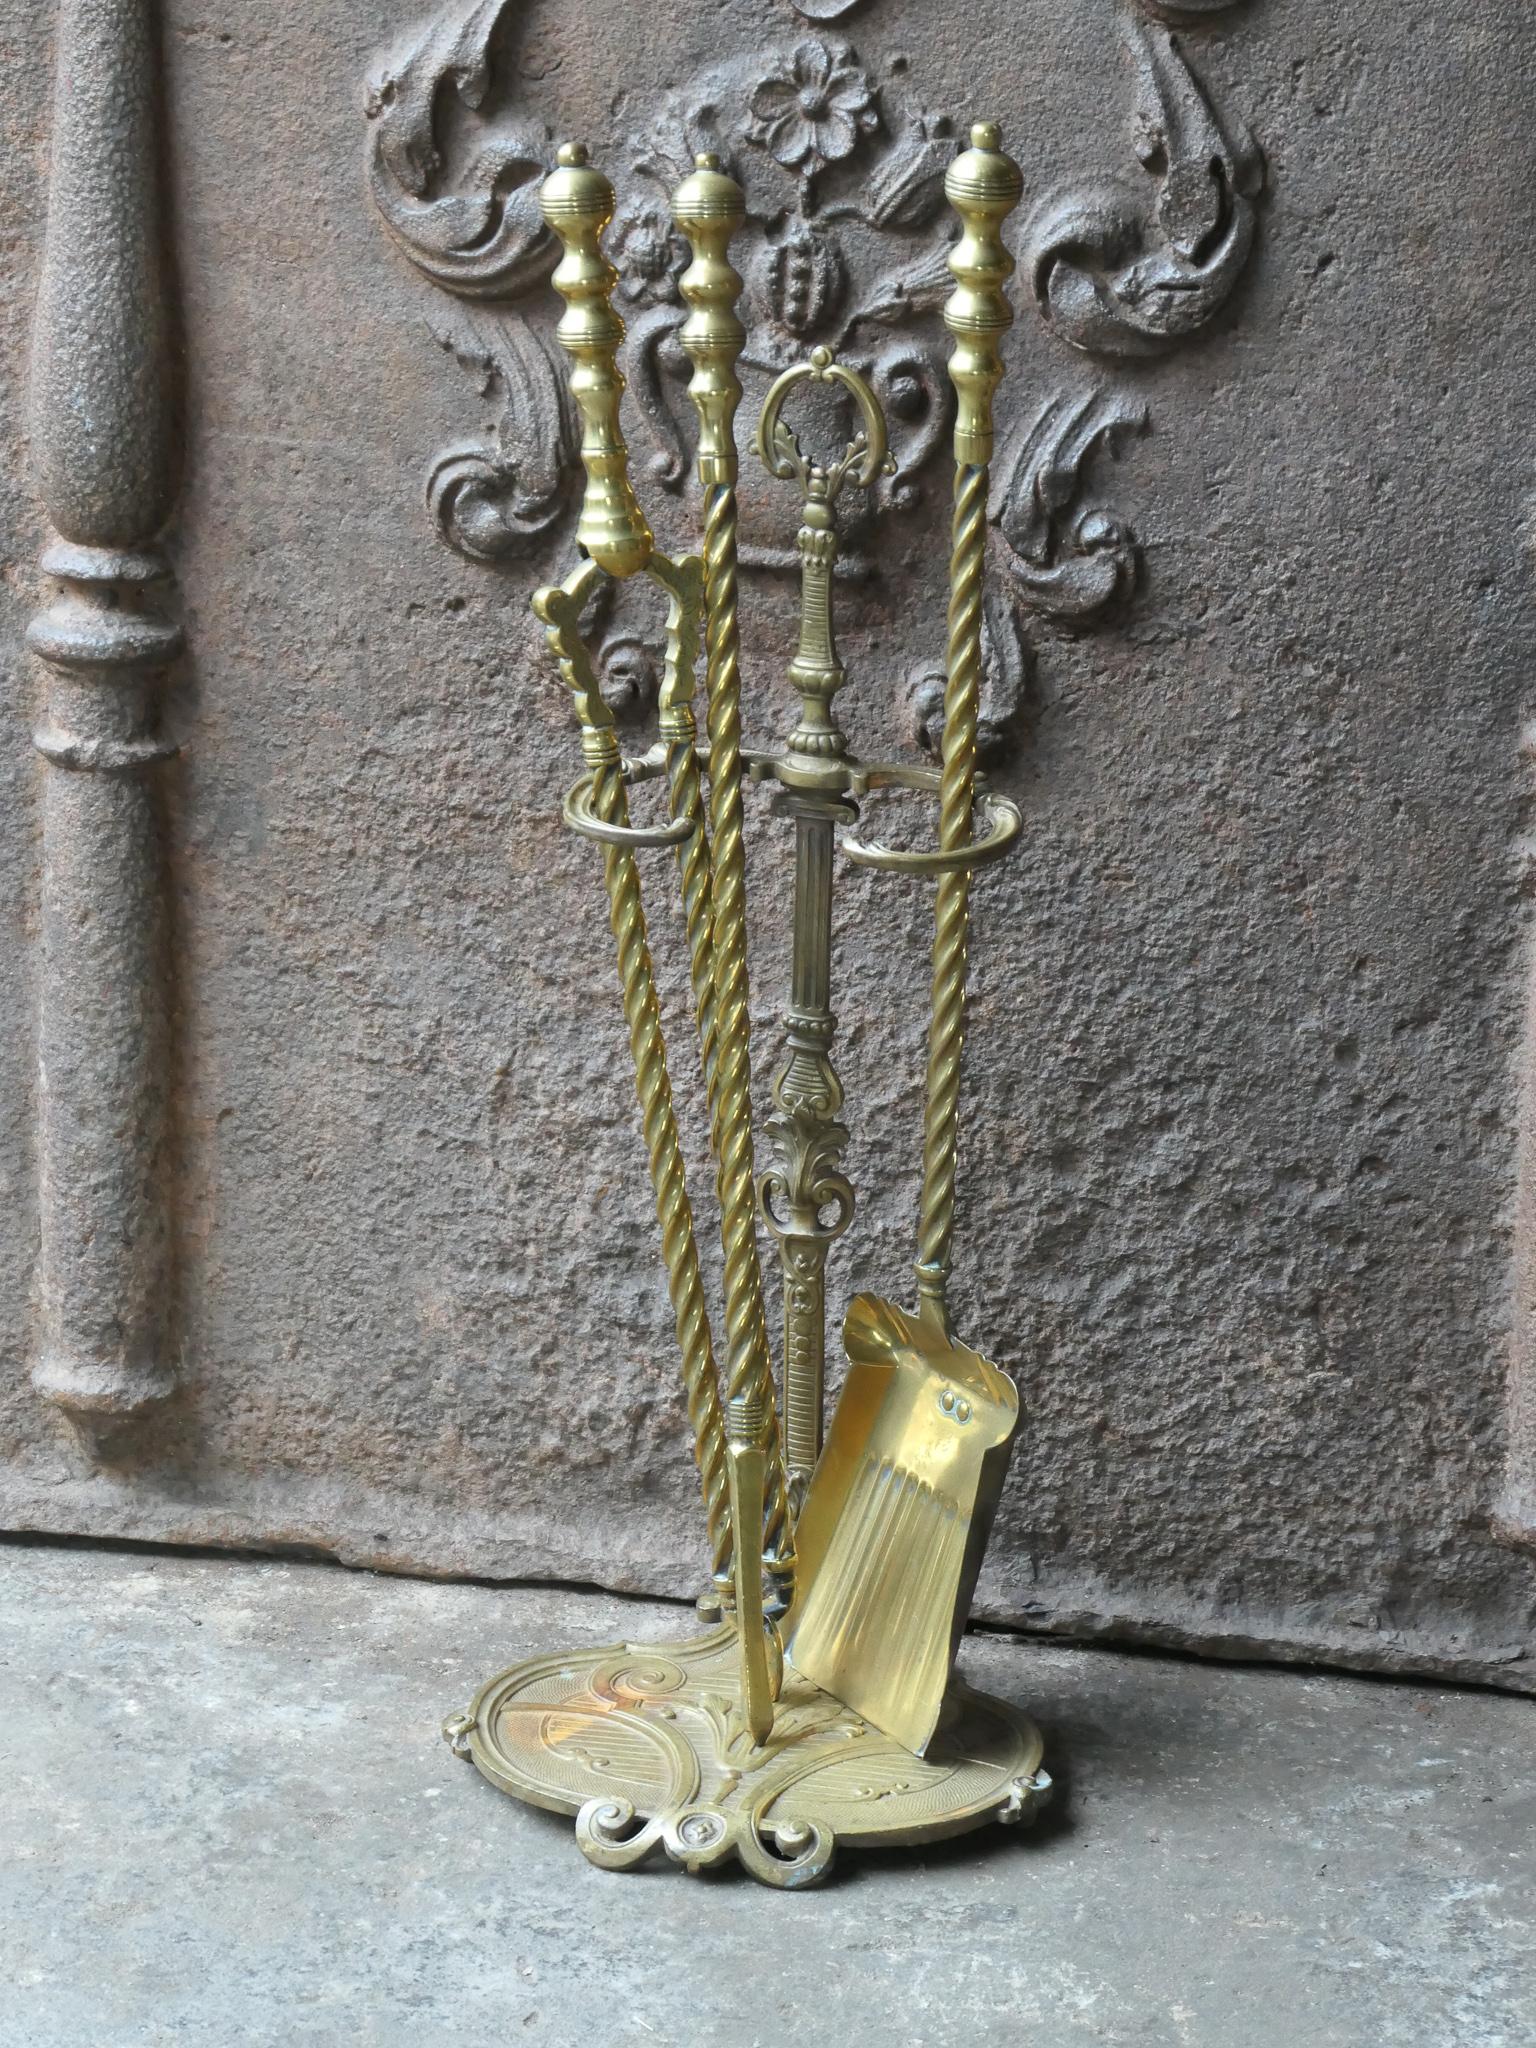 19th/20th Century English Victorian style fireplace tools. The tool set consists of thongs, shovel, poker and stand. Made of brass. It is in a good condition and is fully functional.